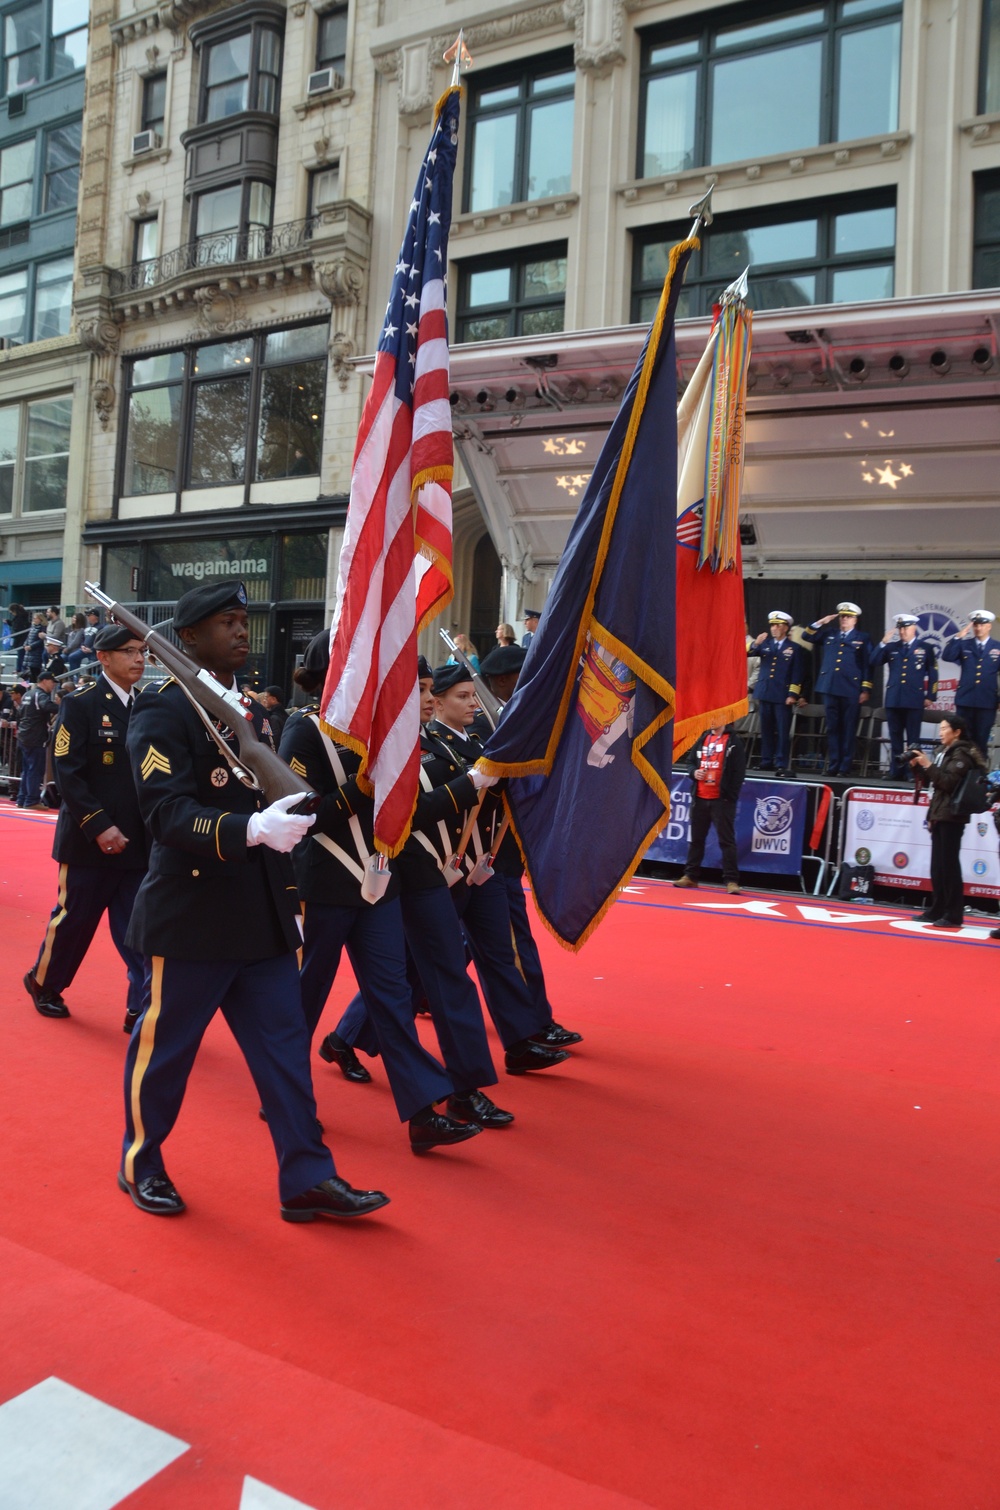 DVIDS Images 369th Sustainment Brigade marches in New York City's